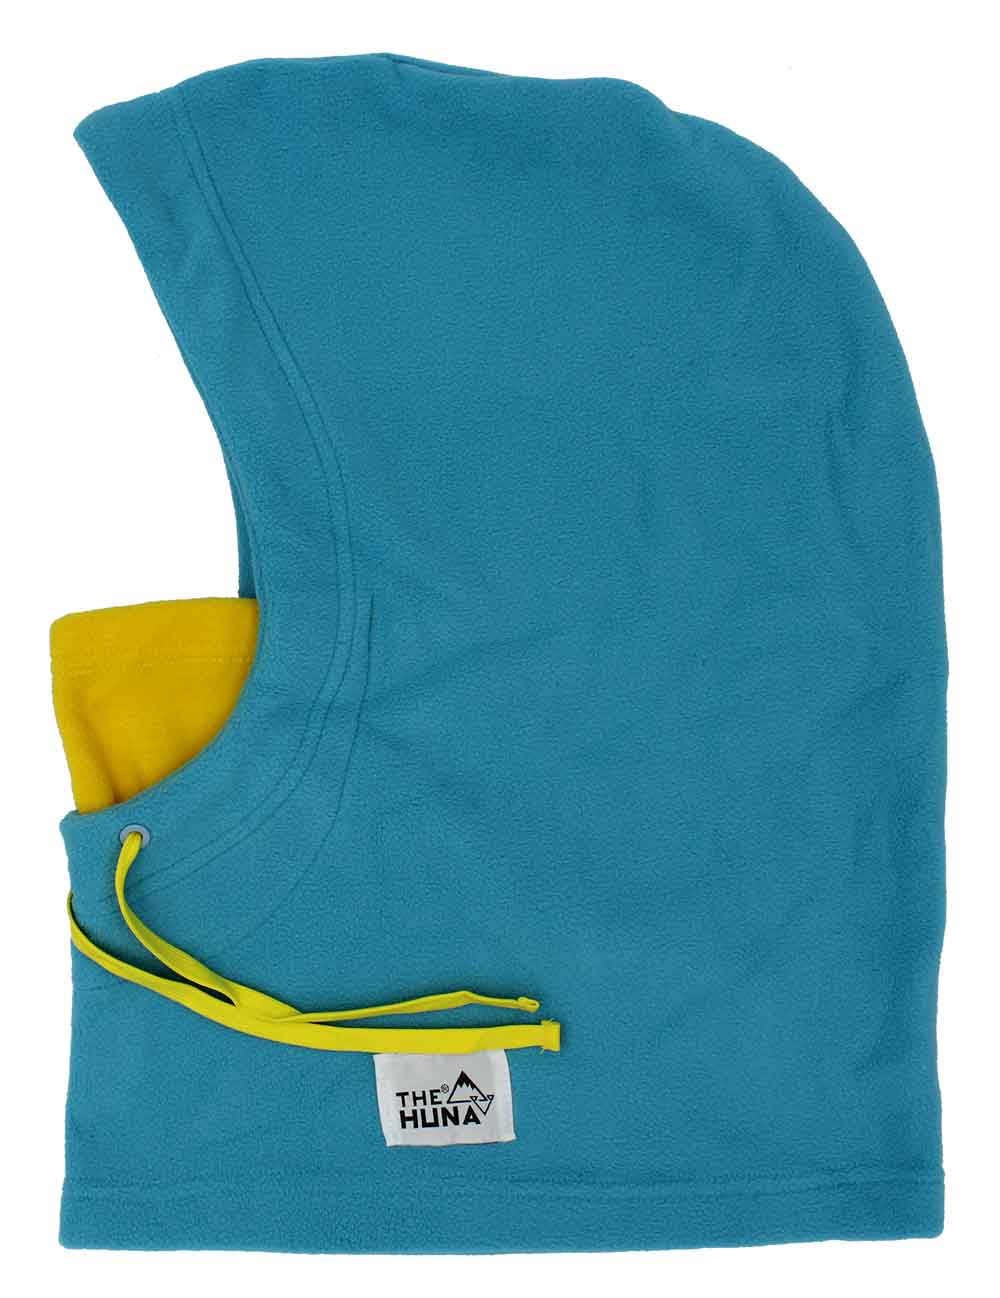 Light Blue with Yellow Mouth & Yellow Strings - Normal Fleece Helmet Hoodie